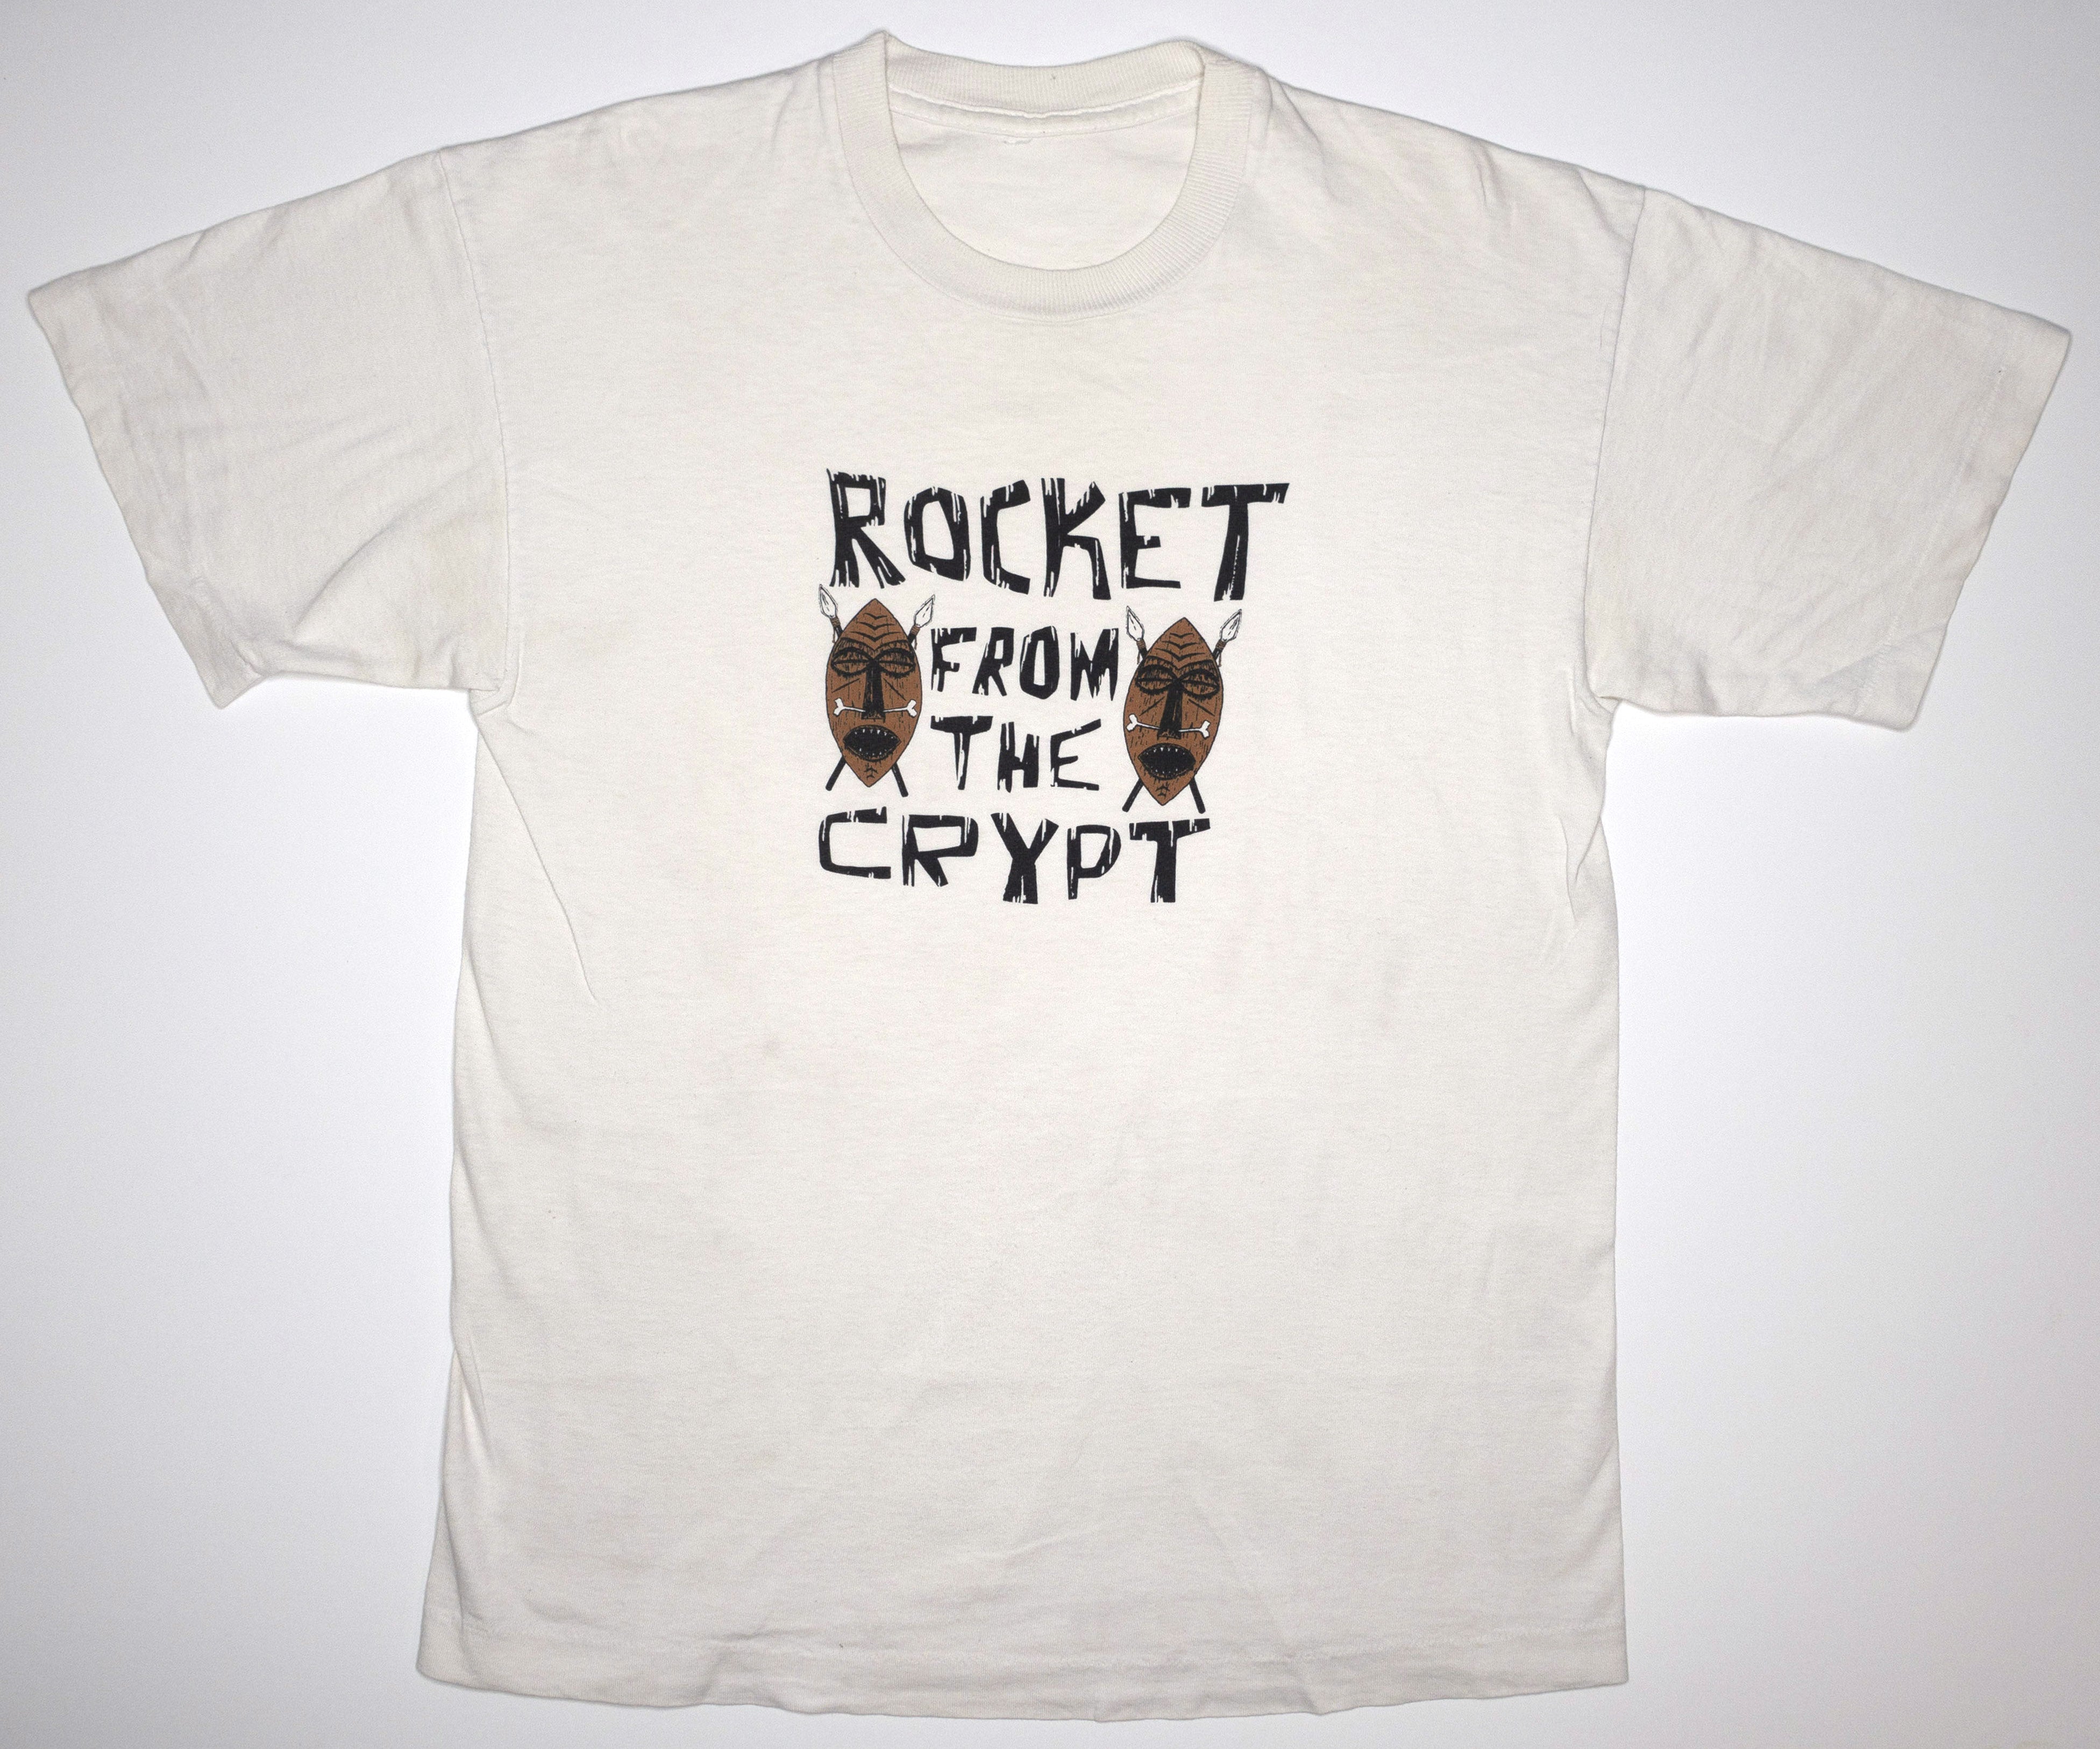 Rocket From The Crypt - Tribal Statues Tour Shirt Size Large